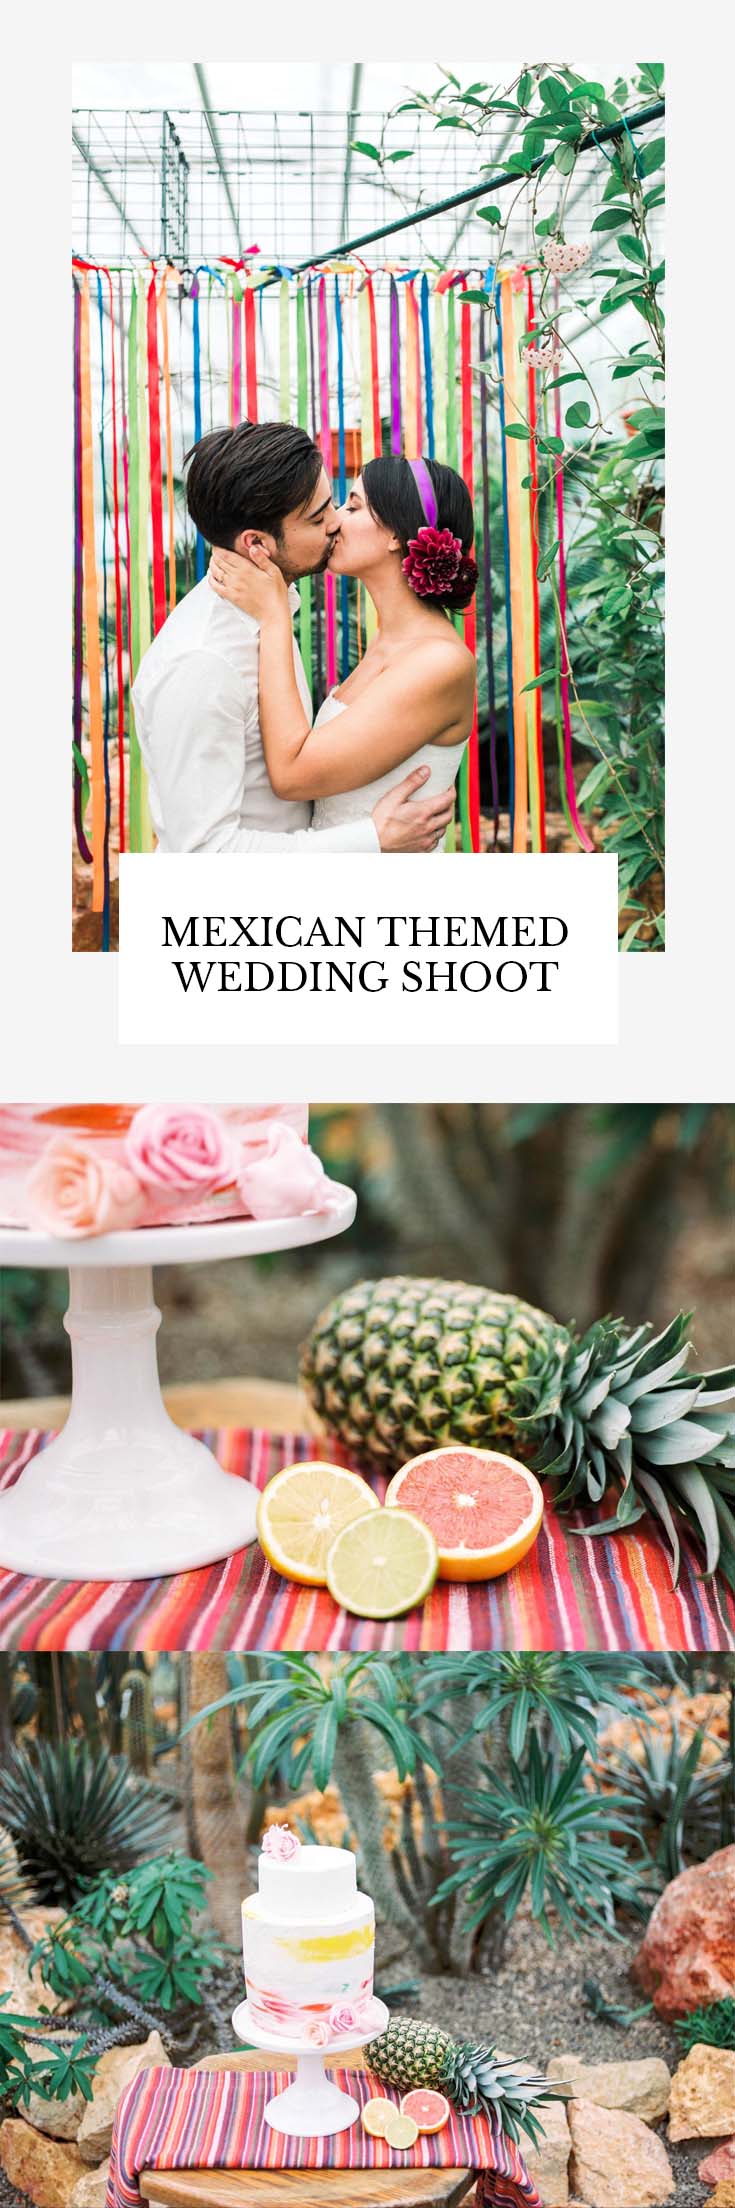 Mexican themed wedding shoot